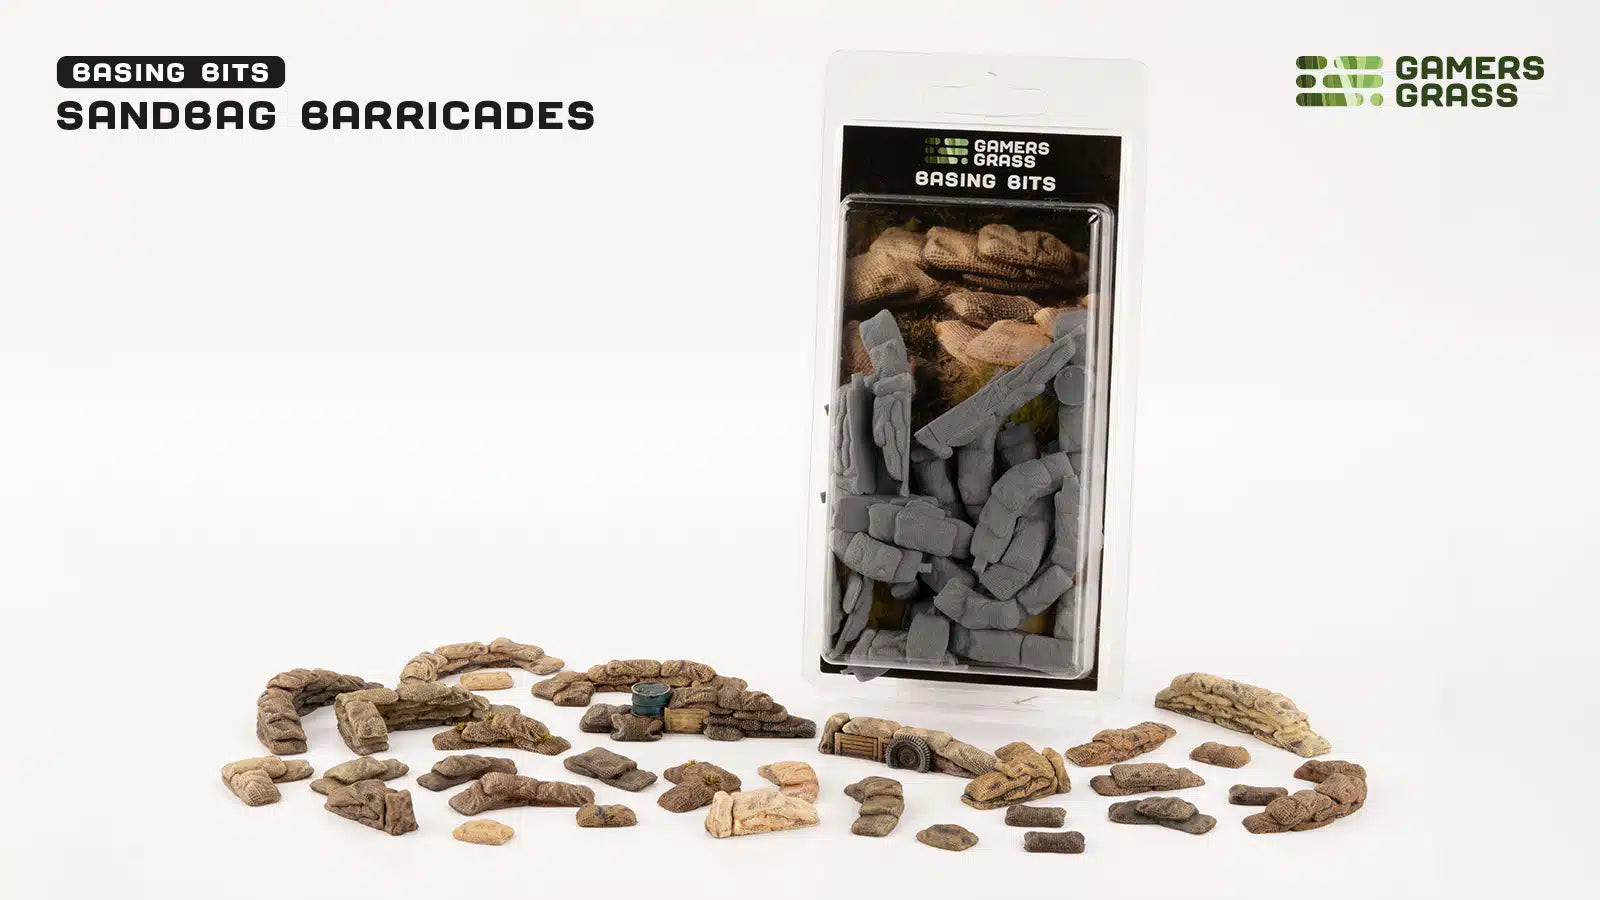 Basing Bits - Sandbag Barricades Gamers Grass Gamers Grass    | Red Claw Gaming